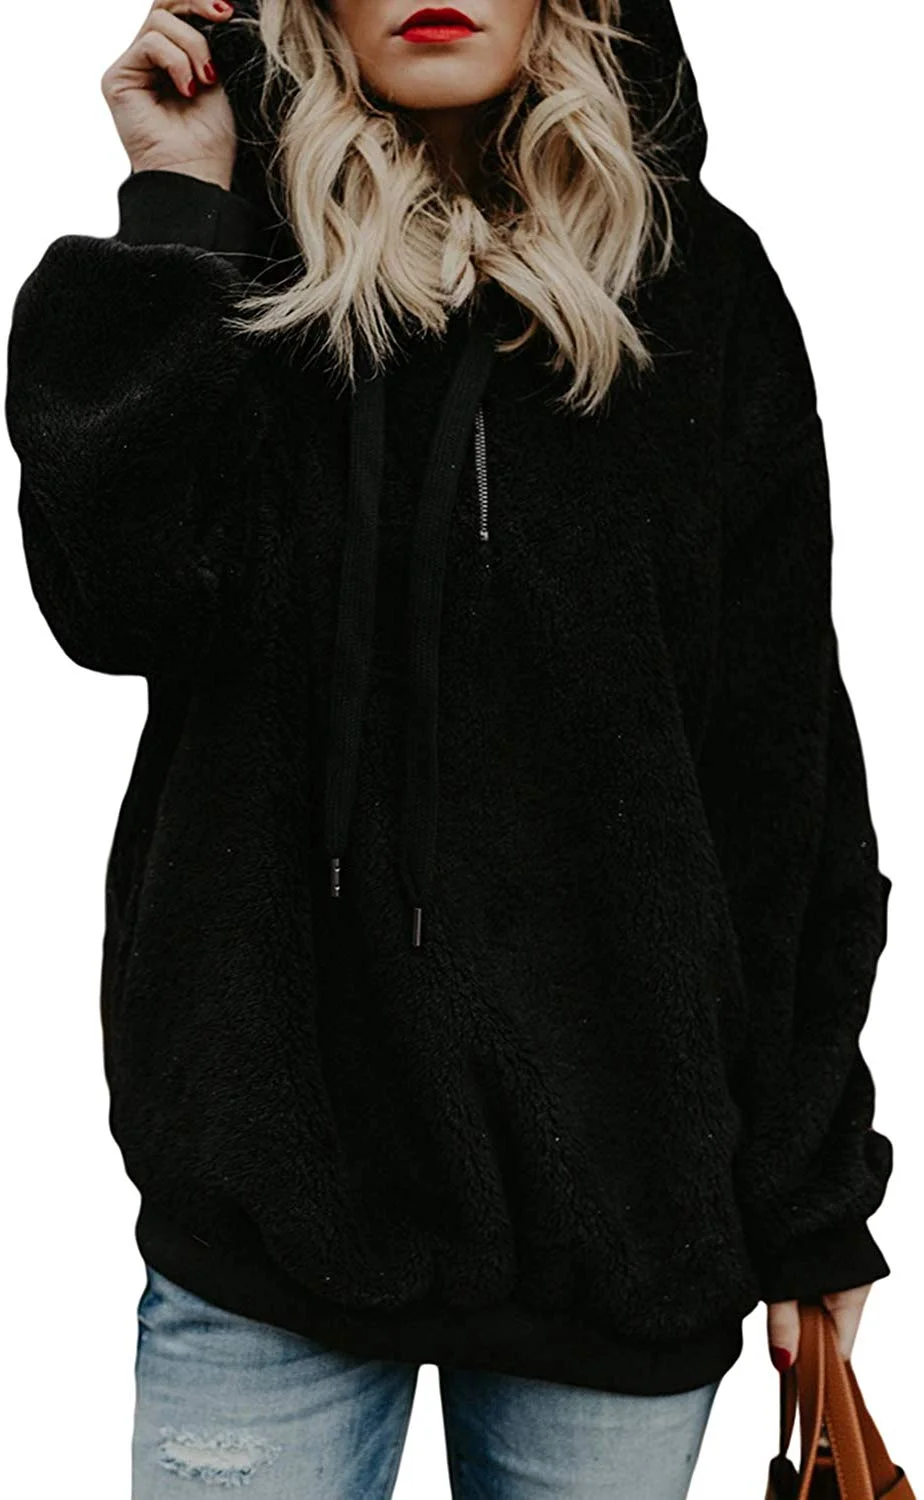 Womens Fuzzy Casual Loose Sweatshirt Hooded with Pockets Outwear S-XXL